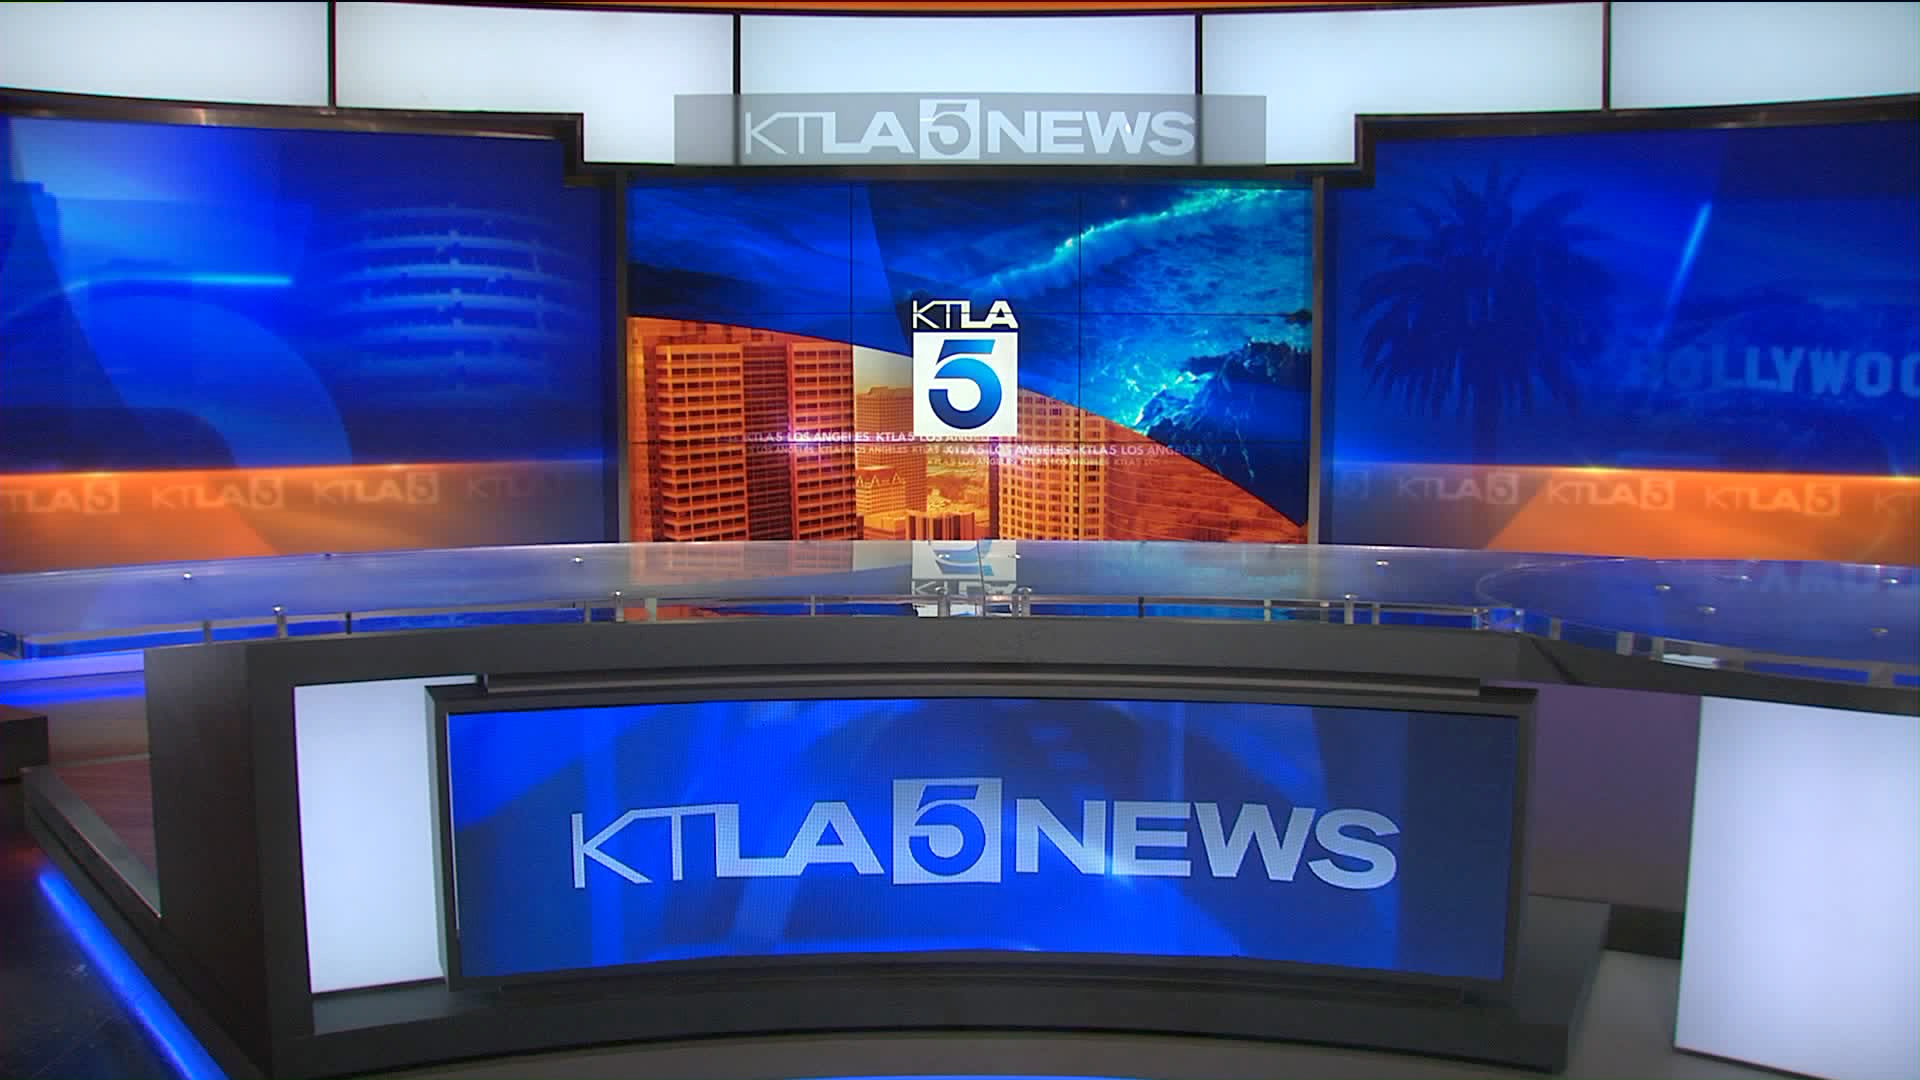 Host your next video chat on the KTLA 5 News set with these custom Zoom background